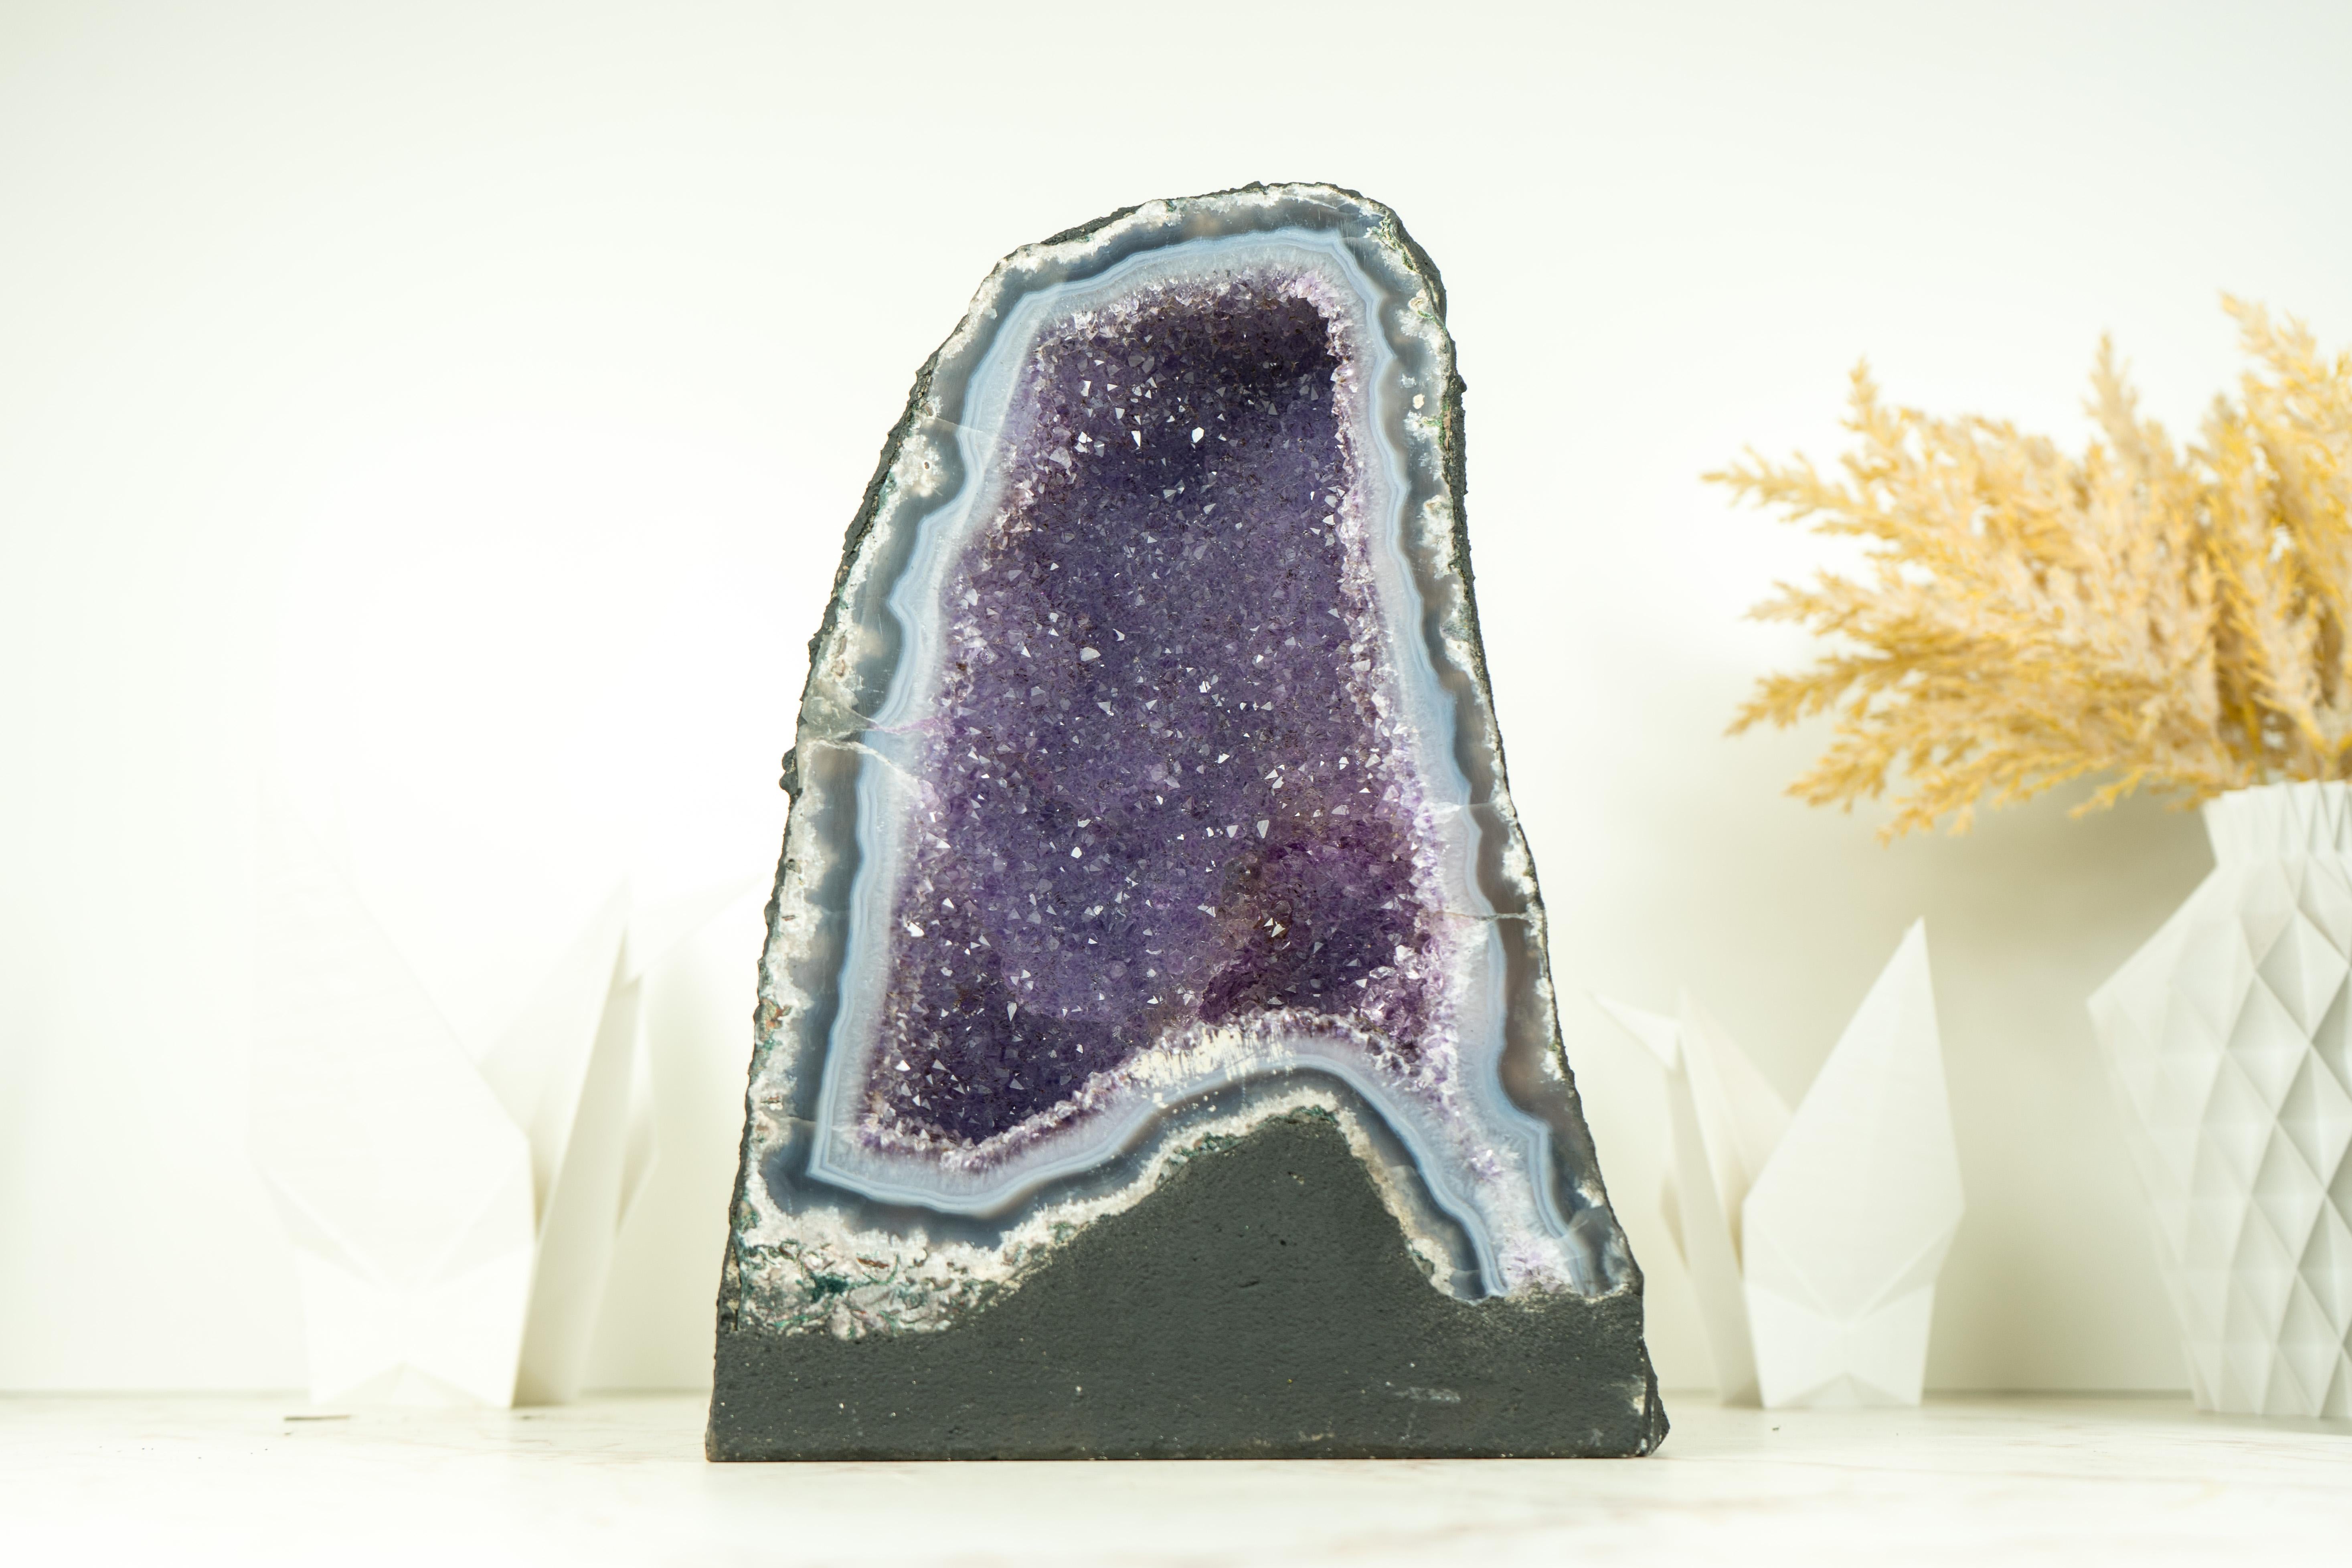 Small in size, these natural Agate Geodes bring many rare characteristics that turn them into natural artworks. Those characteristics, as the blue agate bands, the lavender galaxy druzy, and the perfection of their natural drawings will shine in